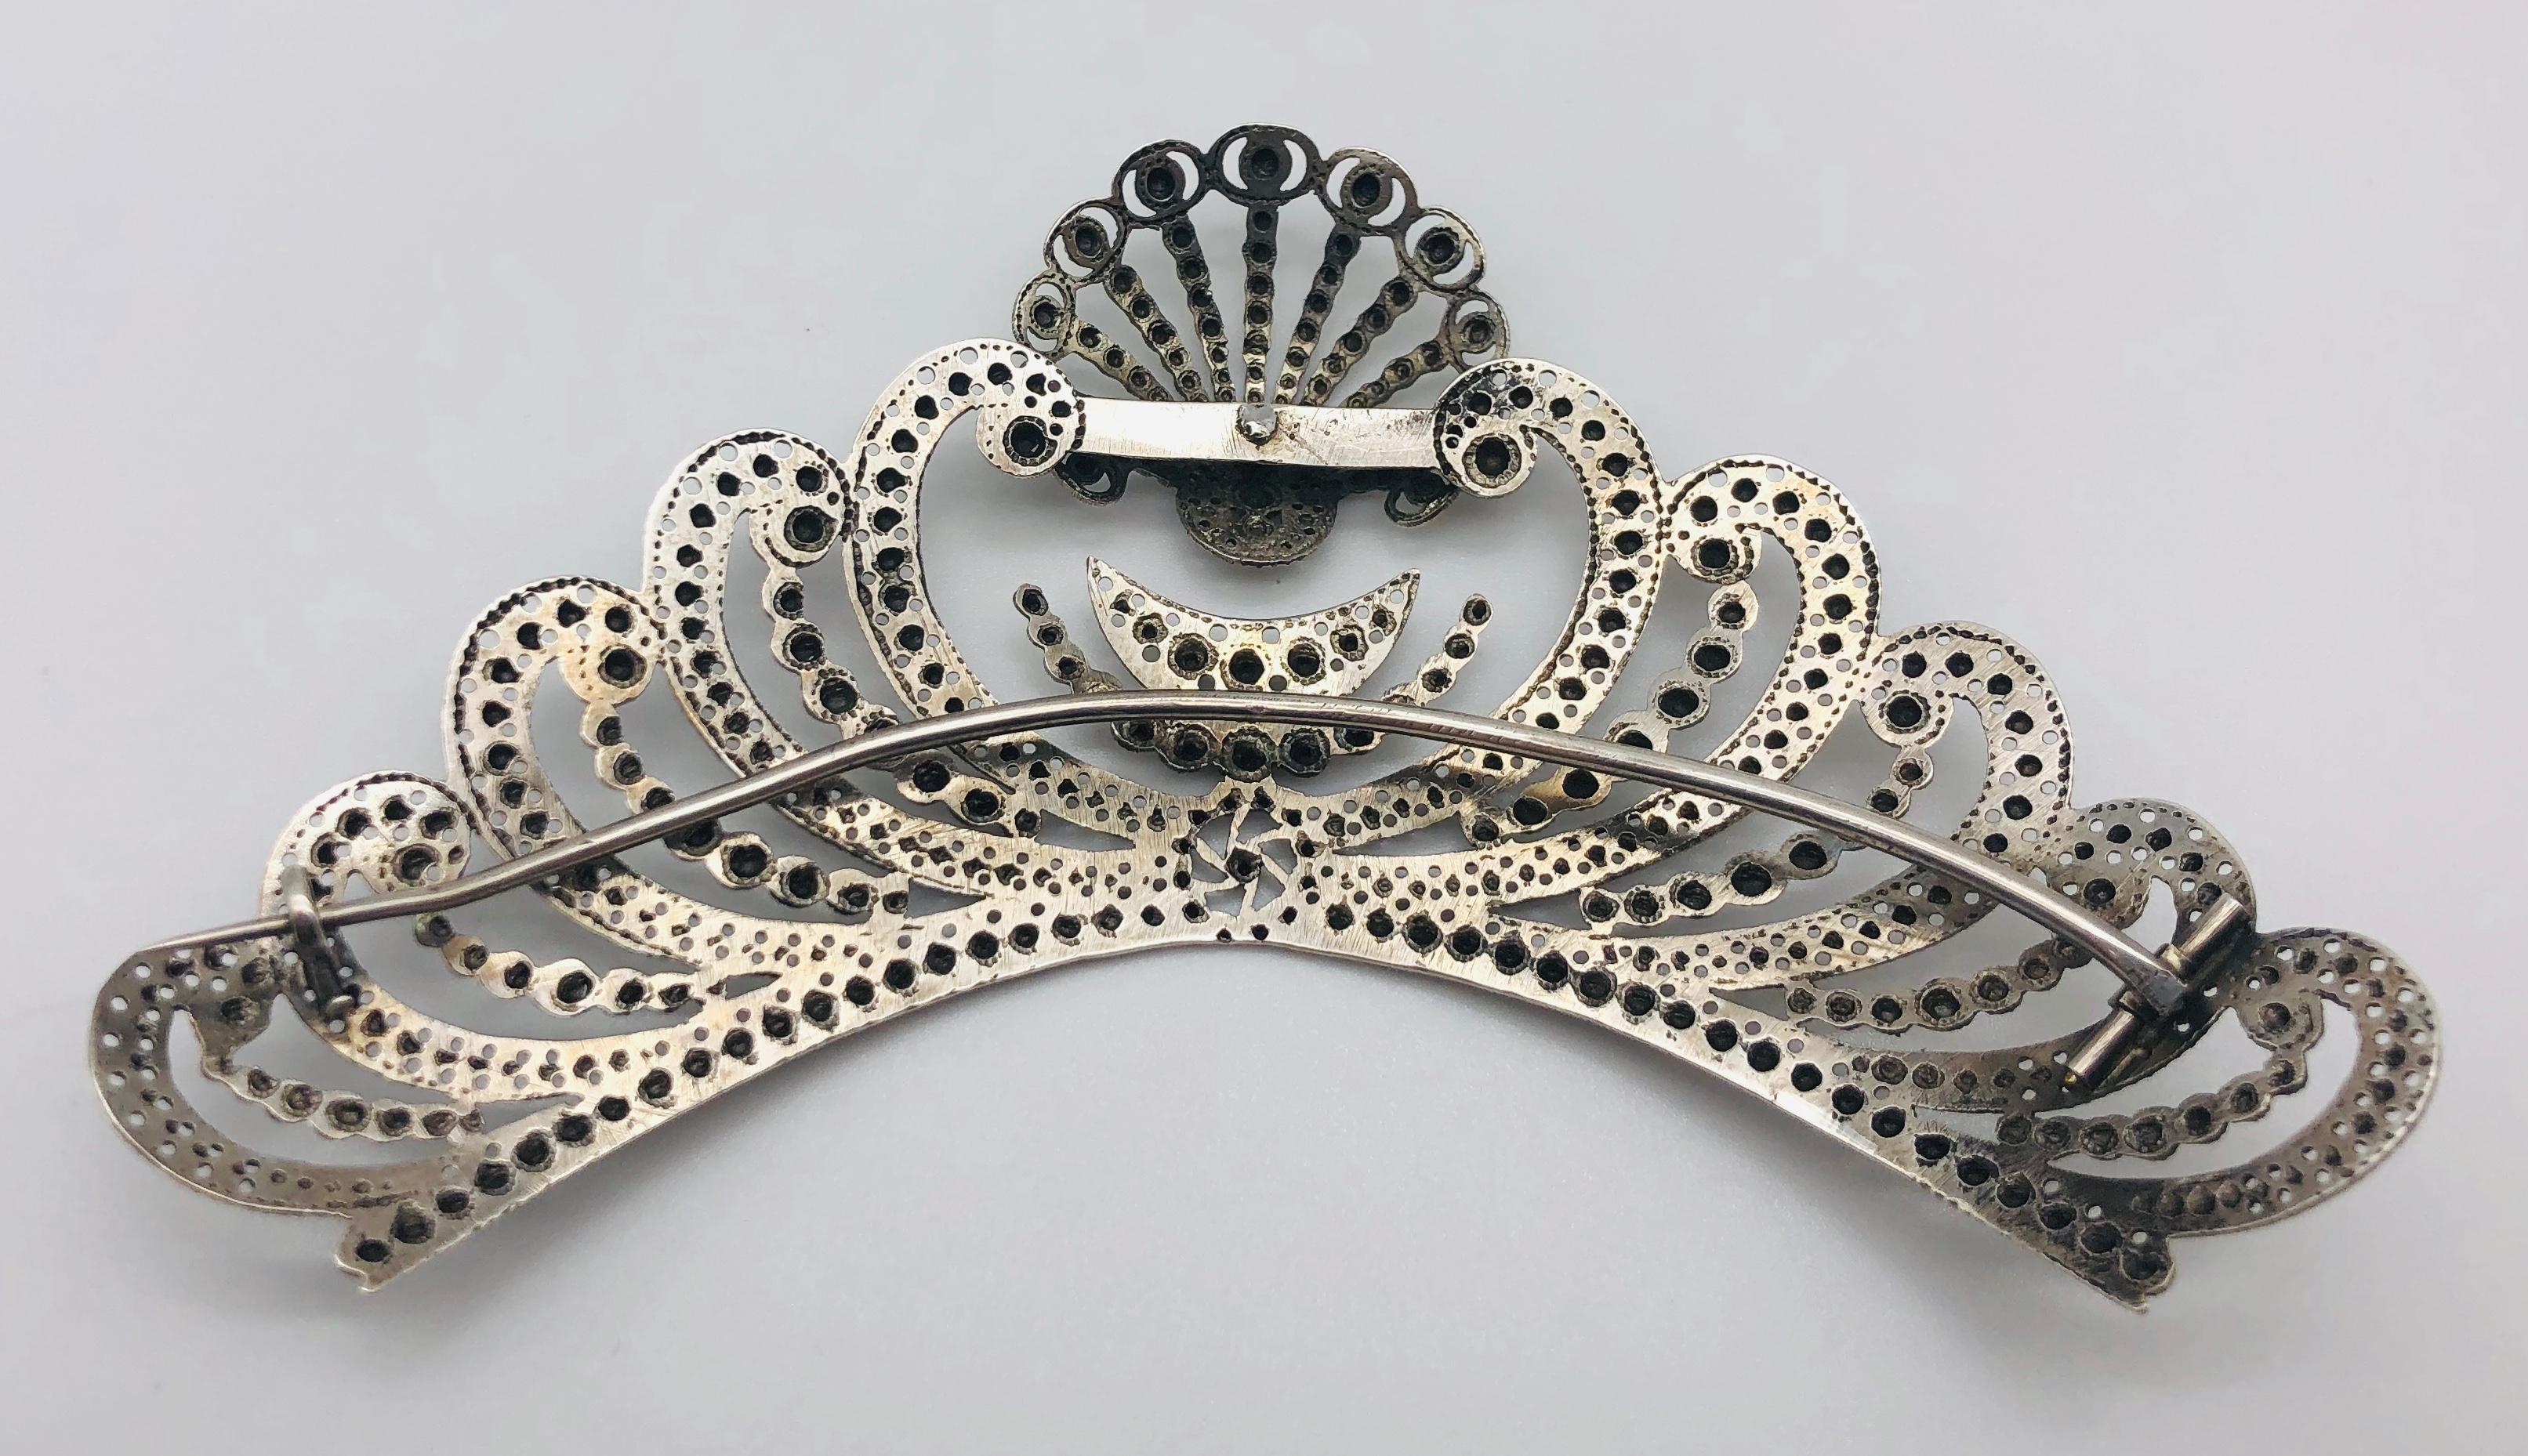 The head tiara ornament is made out of silver and decorated with a scallop, a crescent and a half moon. On top of a big stylised heart sits a scallop. Left and right of the heart are eight wave like ornaments. The silver is embossed in a manner to